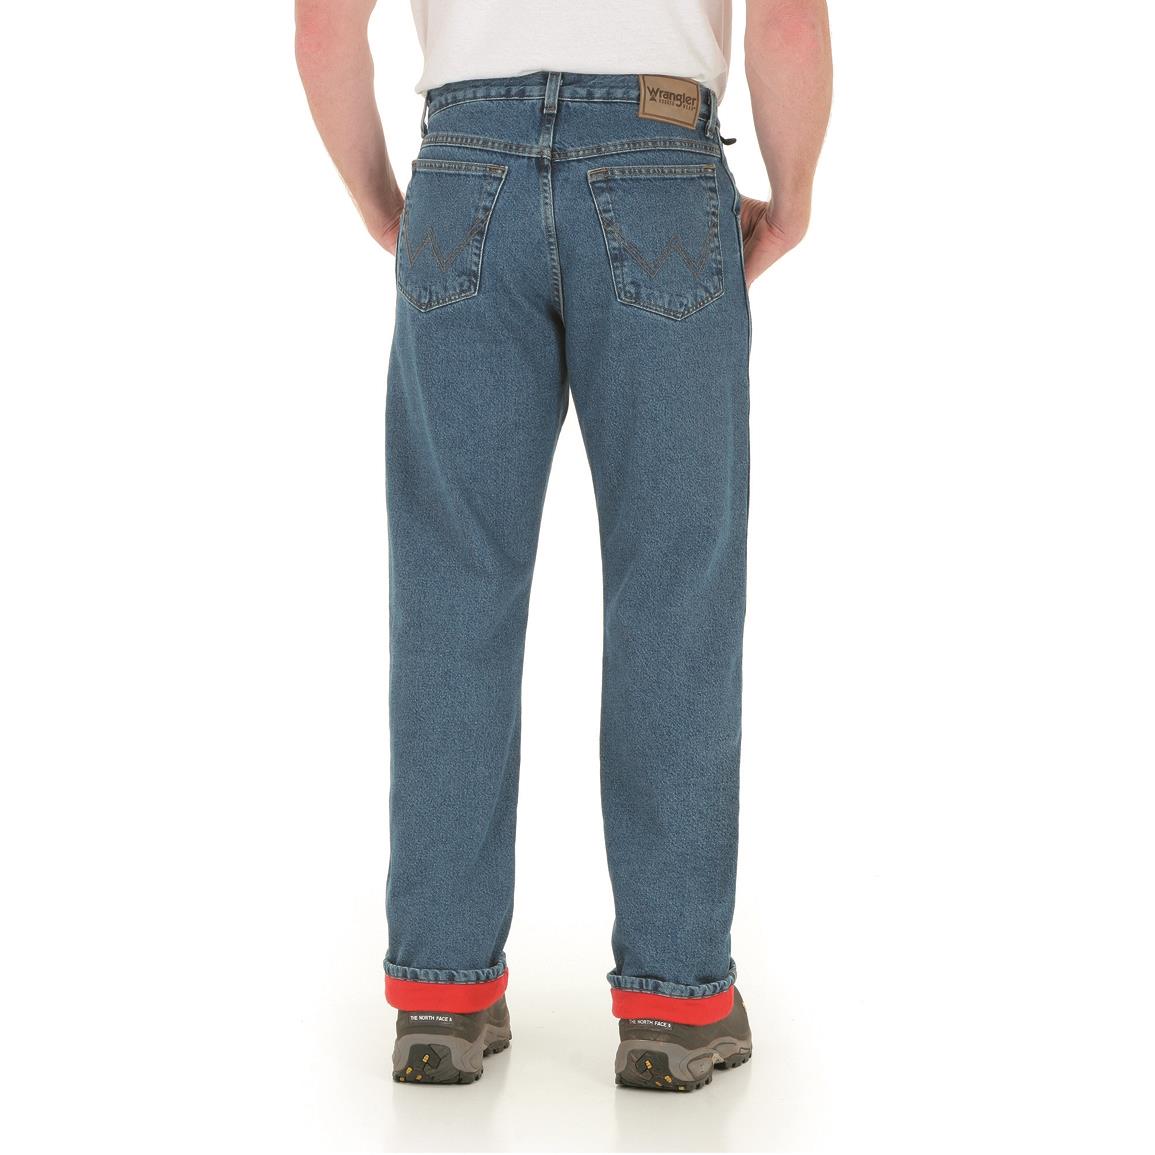 wrangler thermal lined jeans